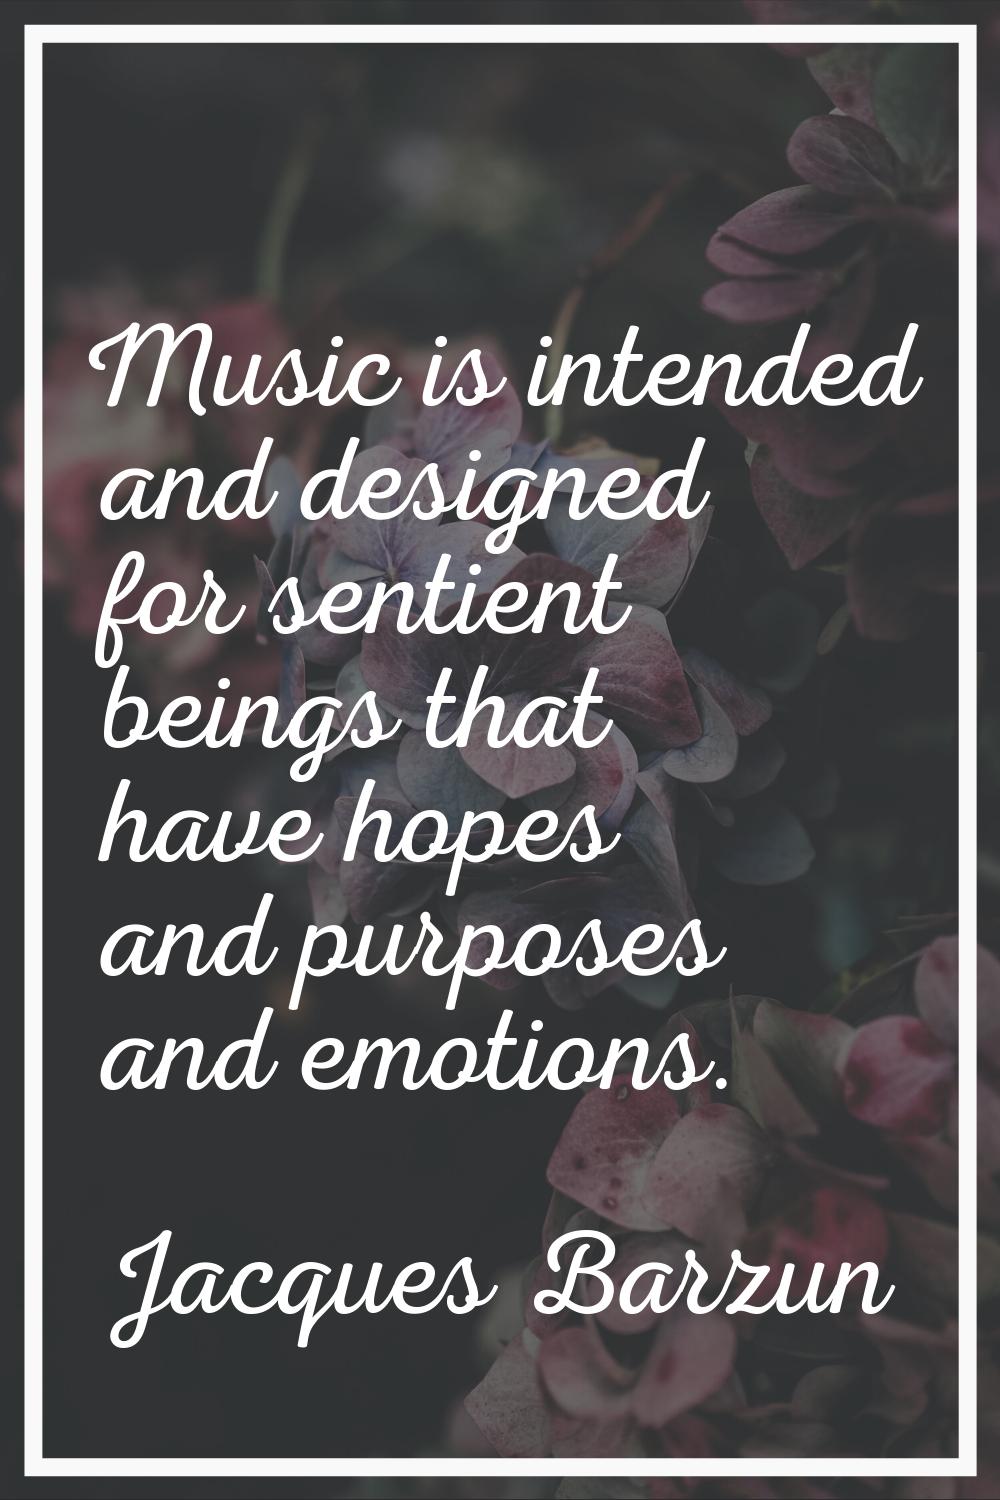 Music is intended and designed for sentient beings that have hopes and purposes and emotions.